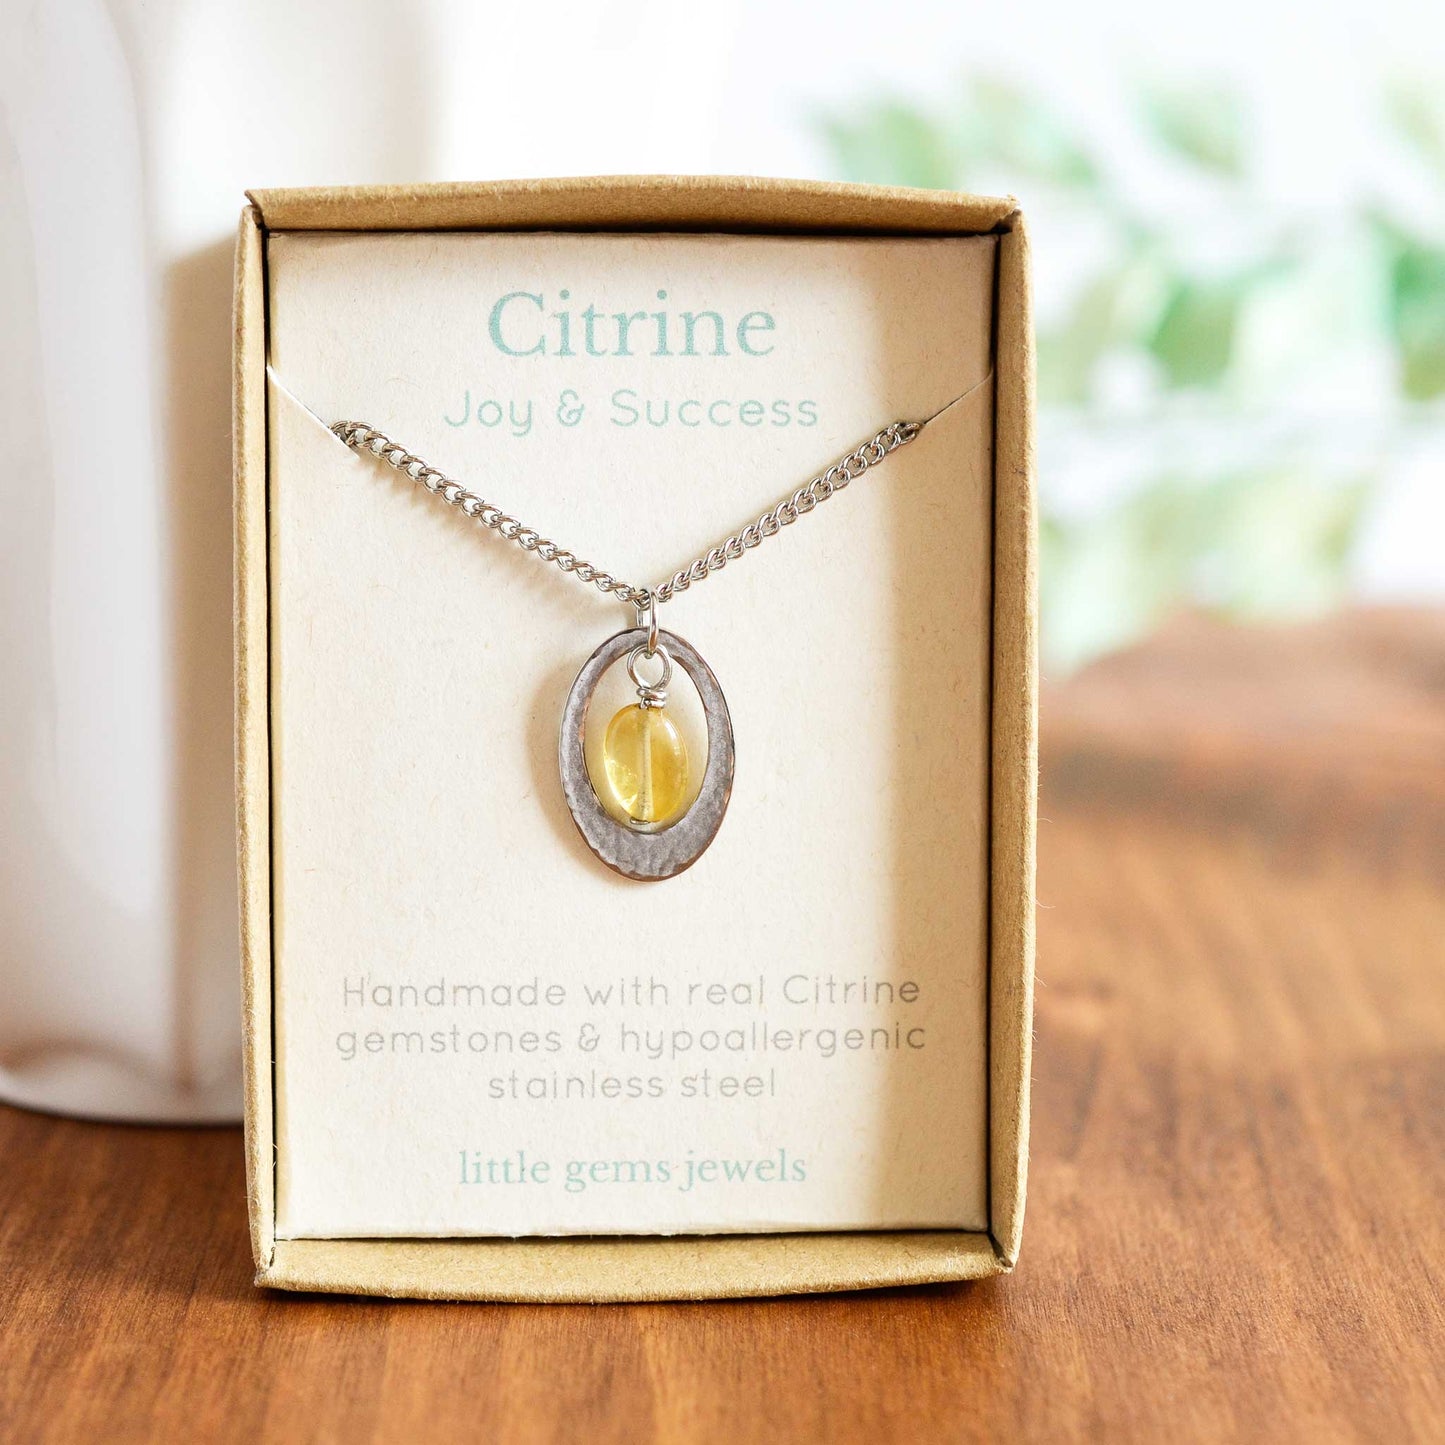 Oval pendant with Citrine gemstone necklace in gift box